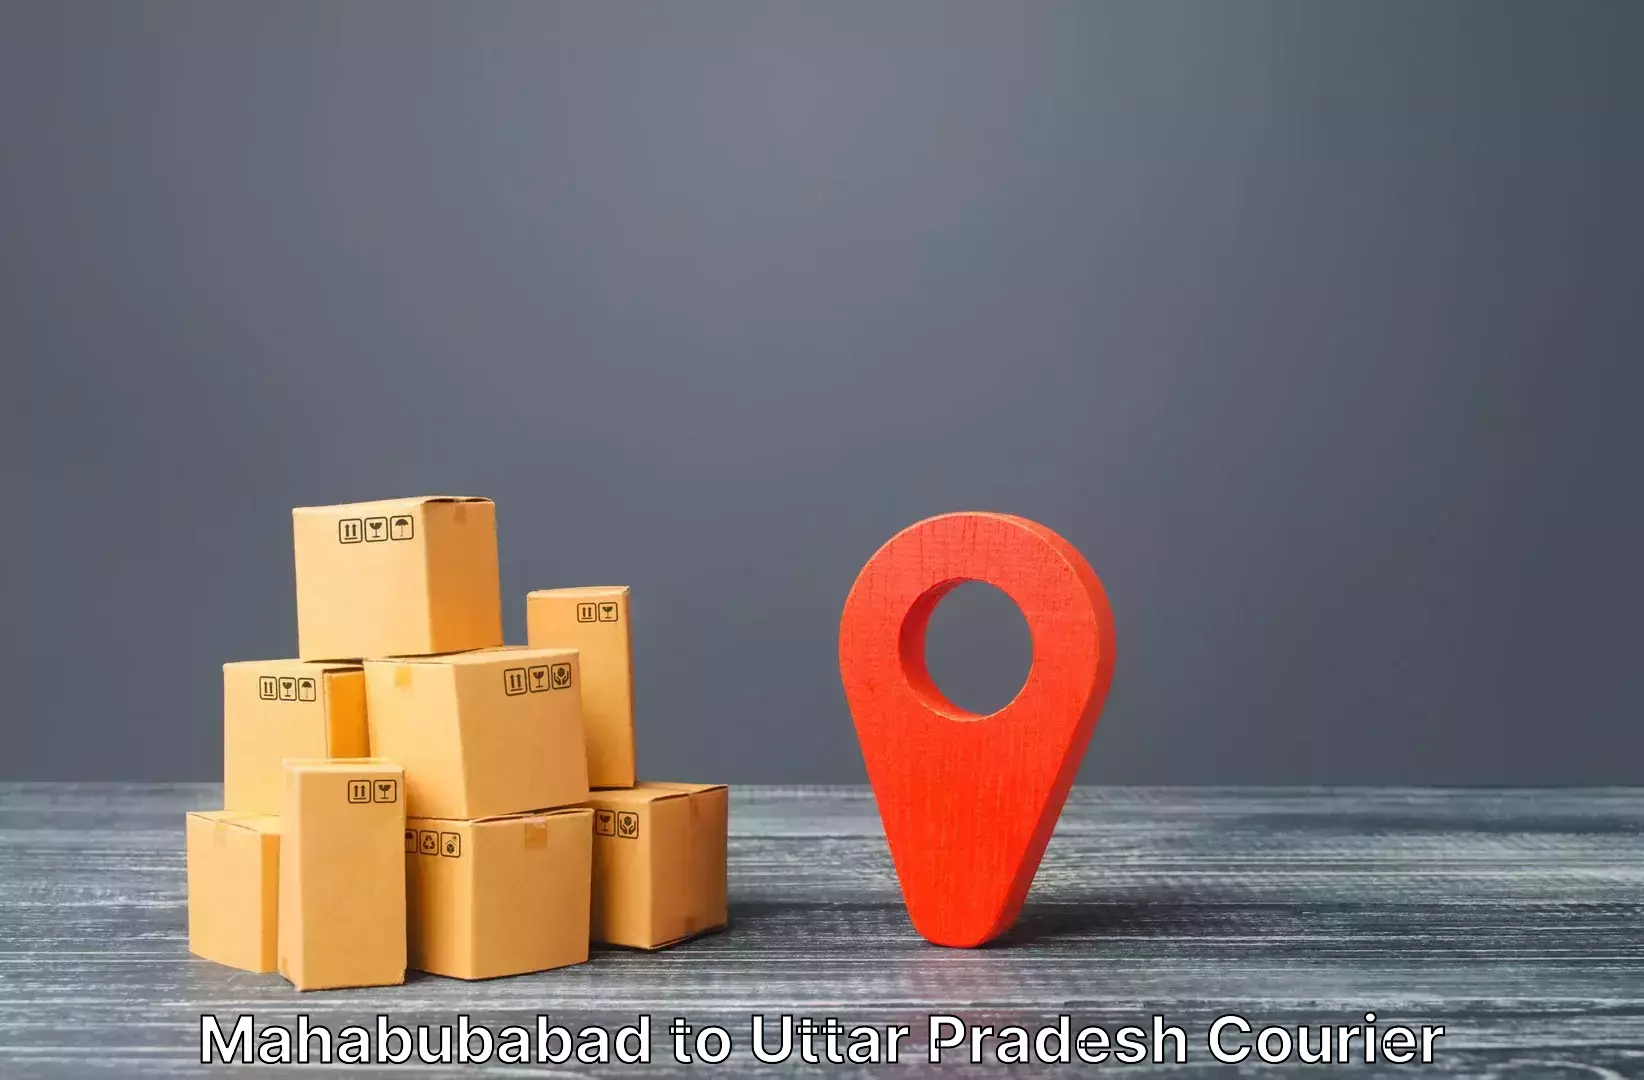 Fast track baggage delivery Mahabubabad to Kanpur